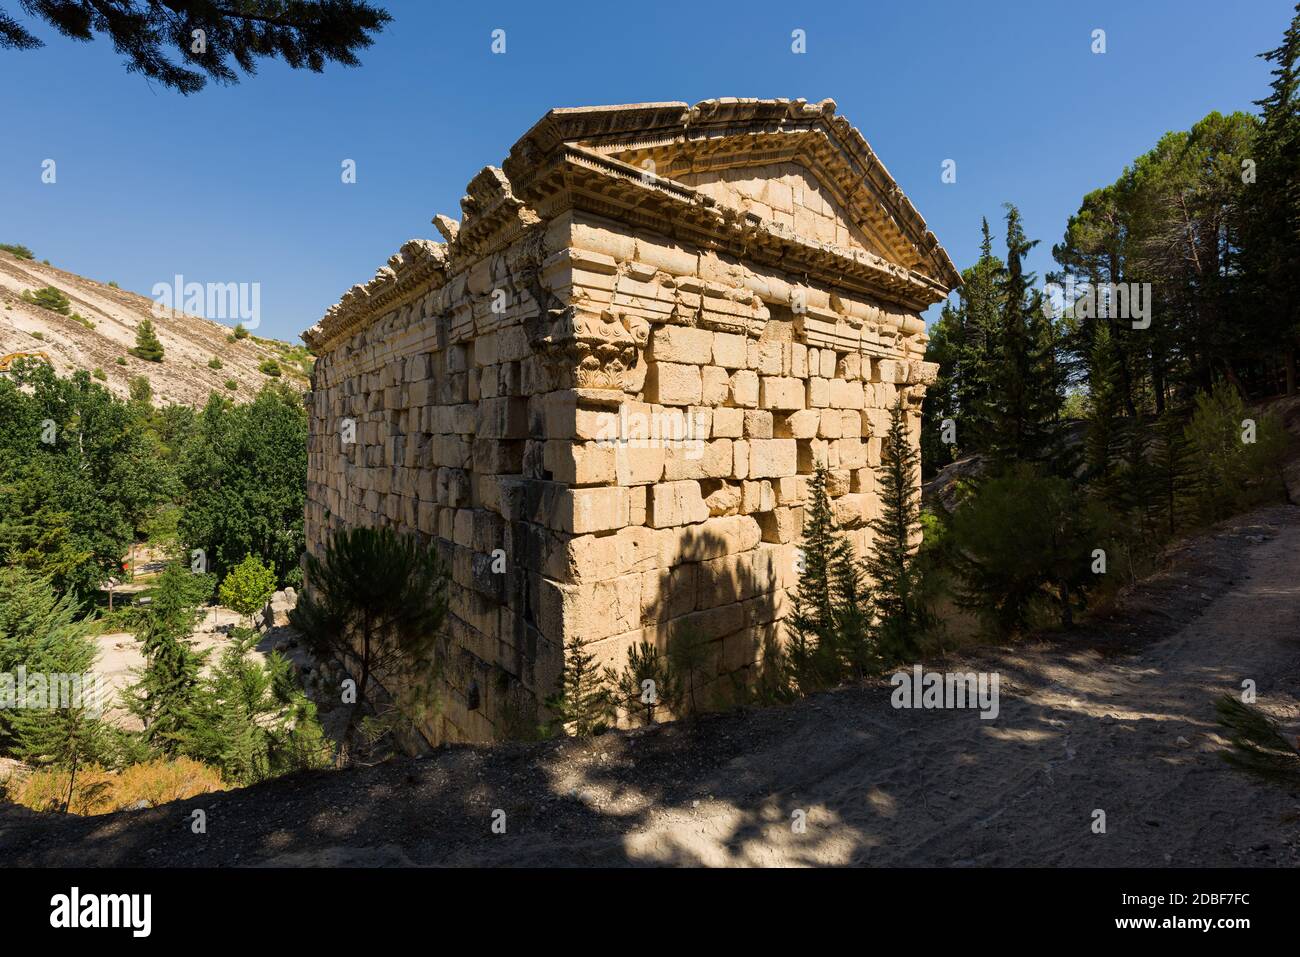 The ancient ruins of the Lower Roman temple of Niha, a landmark in the Bekaa Valley, in Fourzol, Zahle, Lebanon Stock Photo